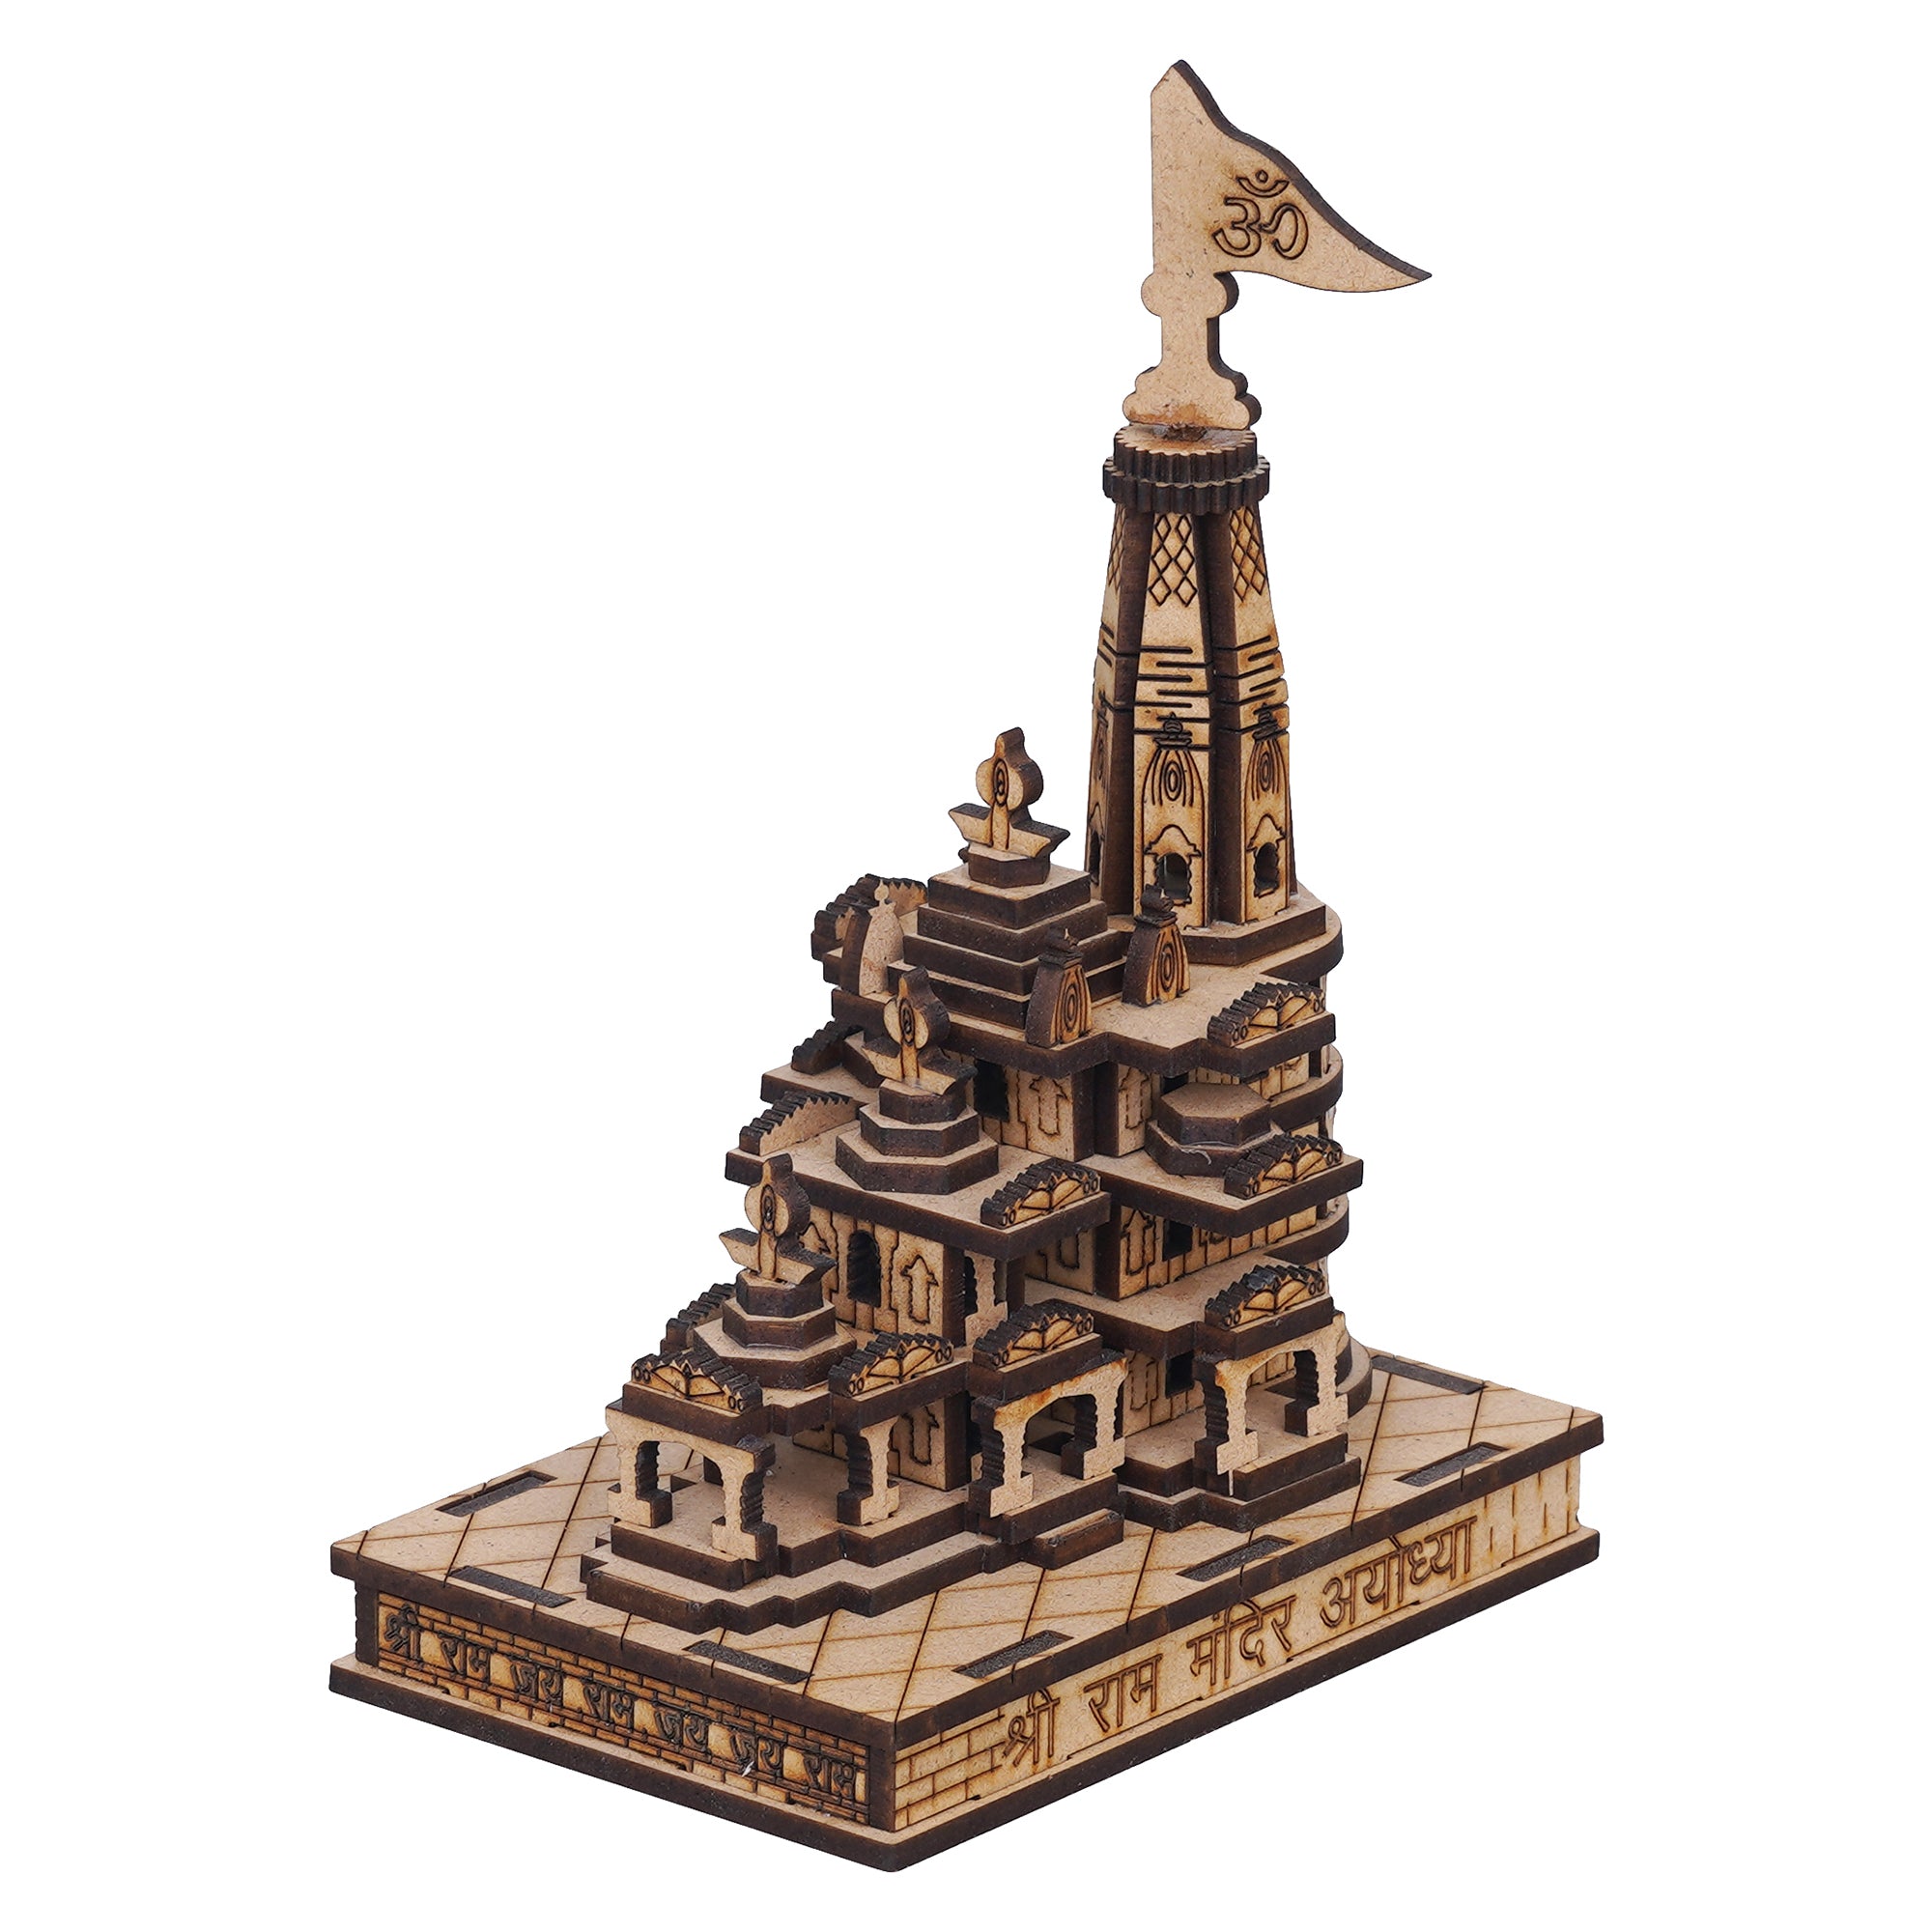 eCraftIndia Shri Ram Mandir Ayodhya Model - Wooden MDF Craftsmanship Authentic Designer Temple with Protective Gift Box - Ideal for Home Temple, Decor, and Spiritual Gifting 6